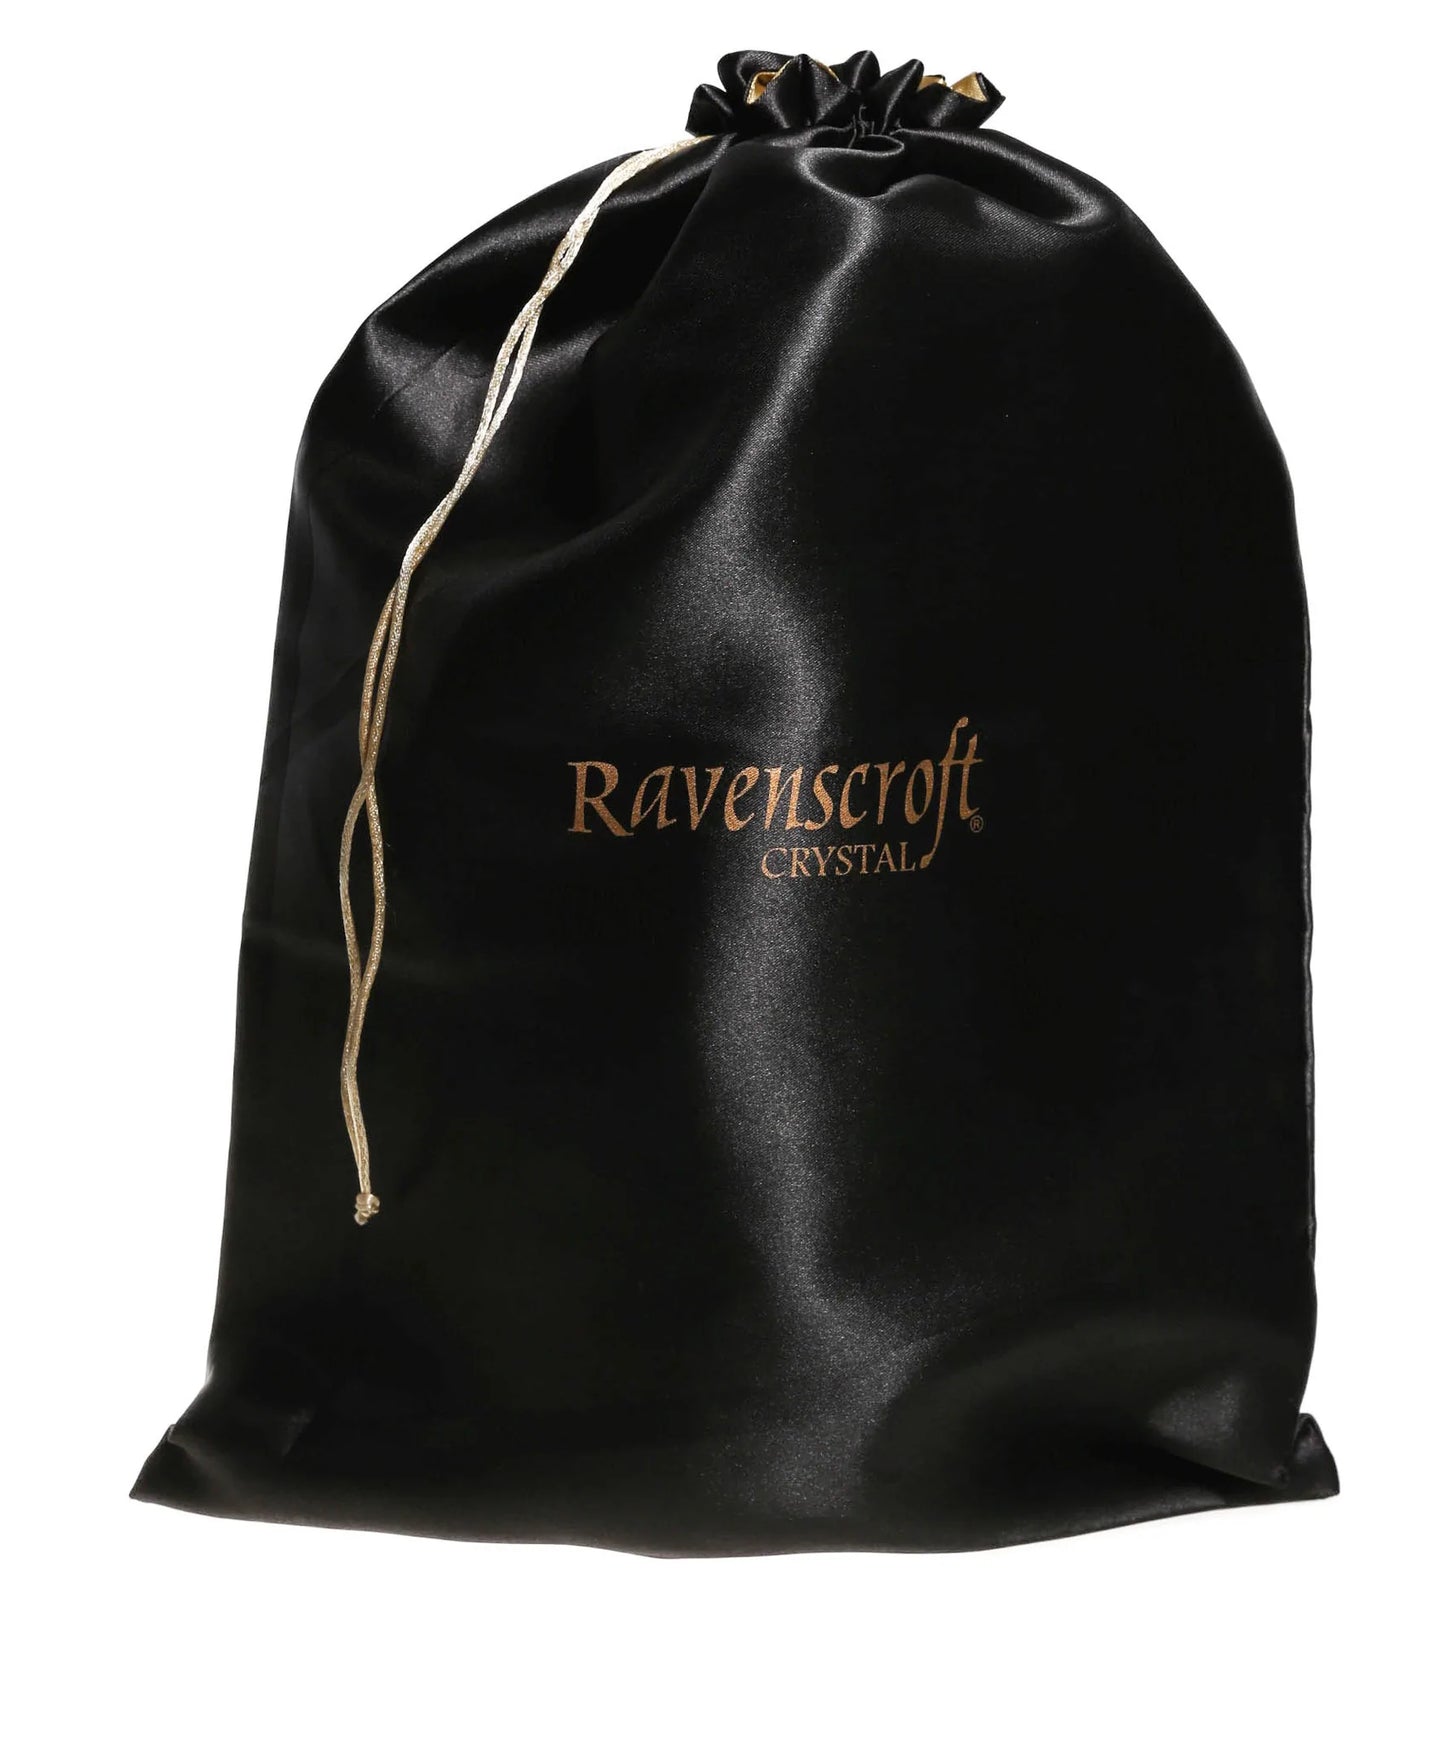 Ravenscroft Crystal Bordeaux Decanter with Free Luxury Satin Decanter and Stopper Bags W2662